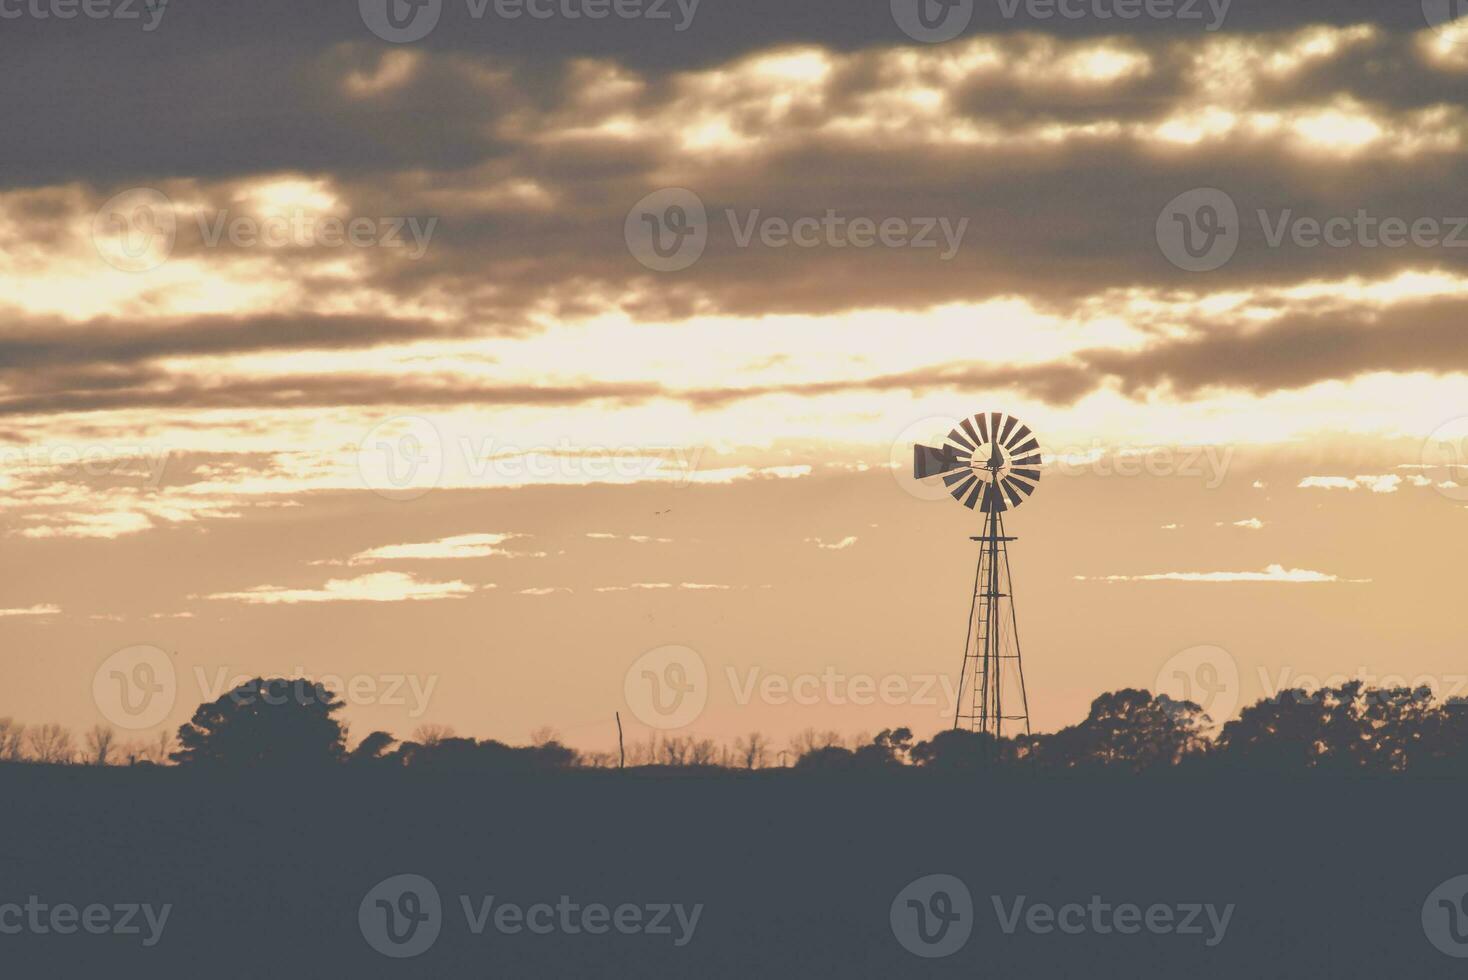 Landscape with windmill at sunset, Pampas, Patagonia,Argentina photo